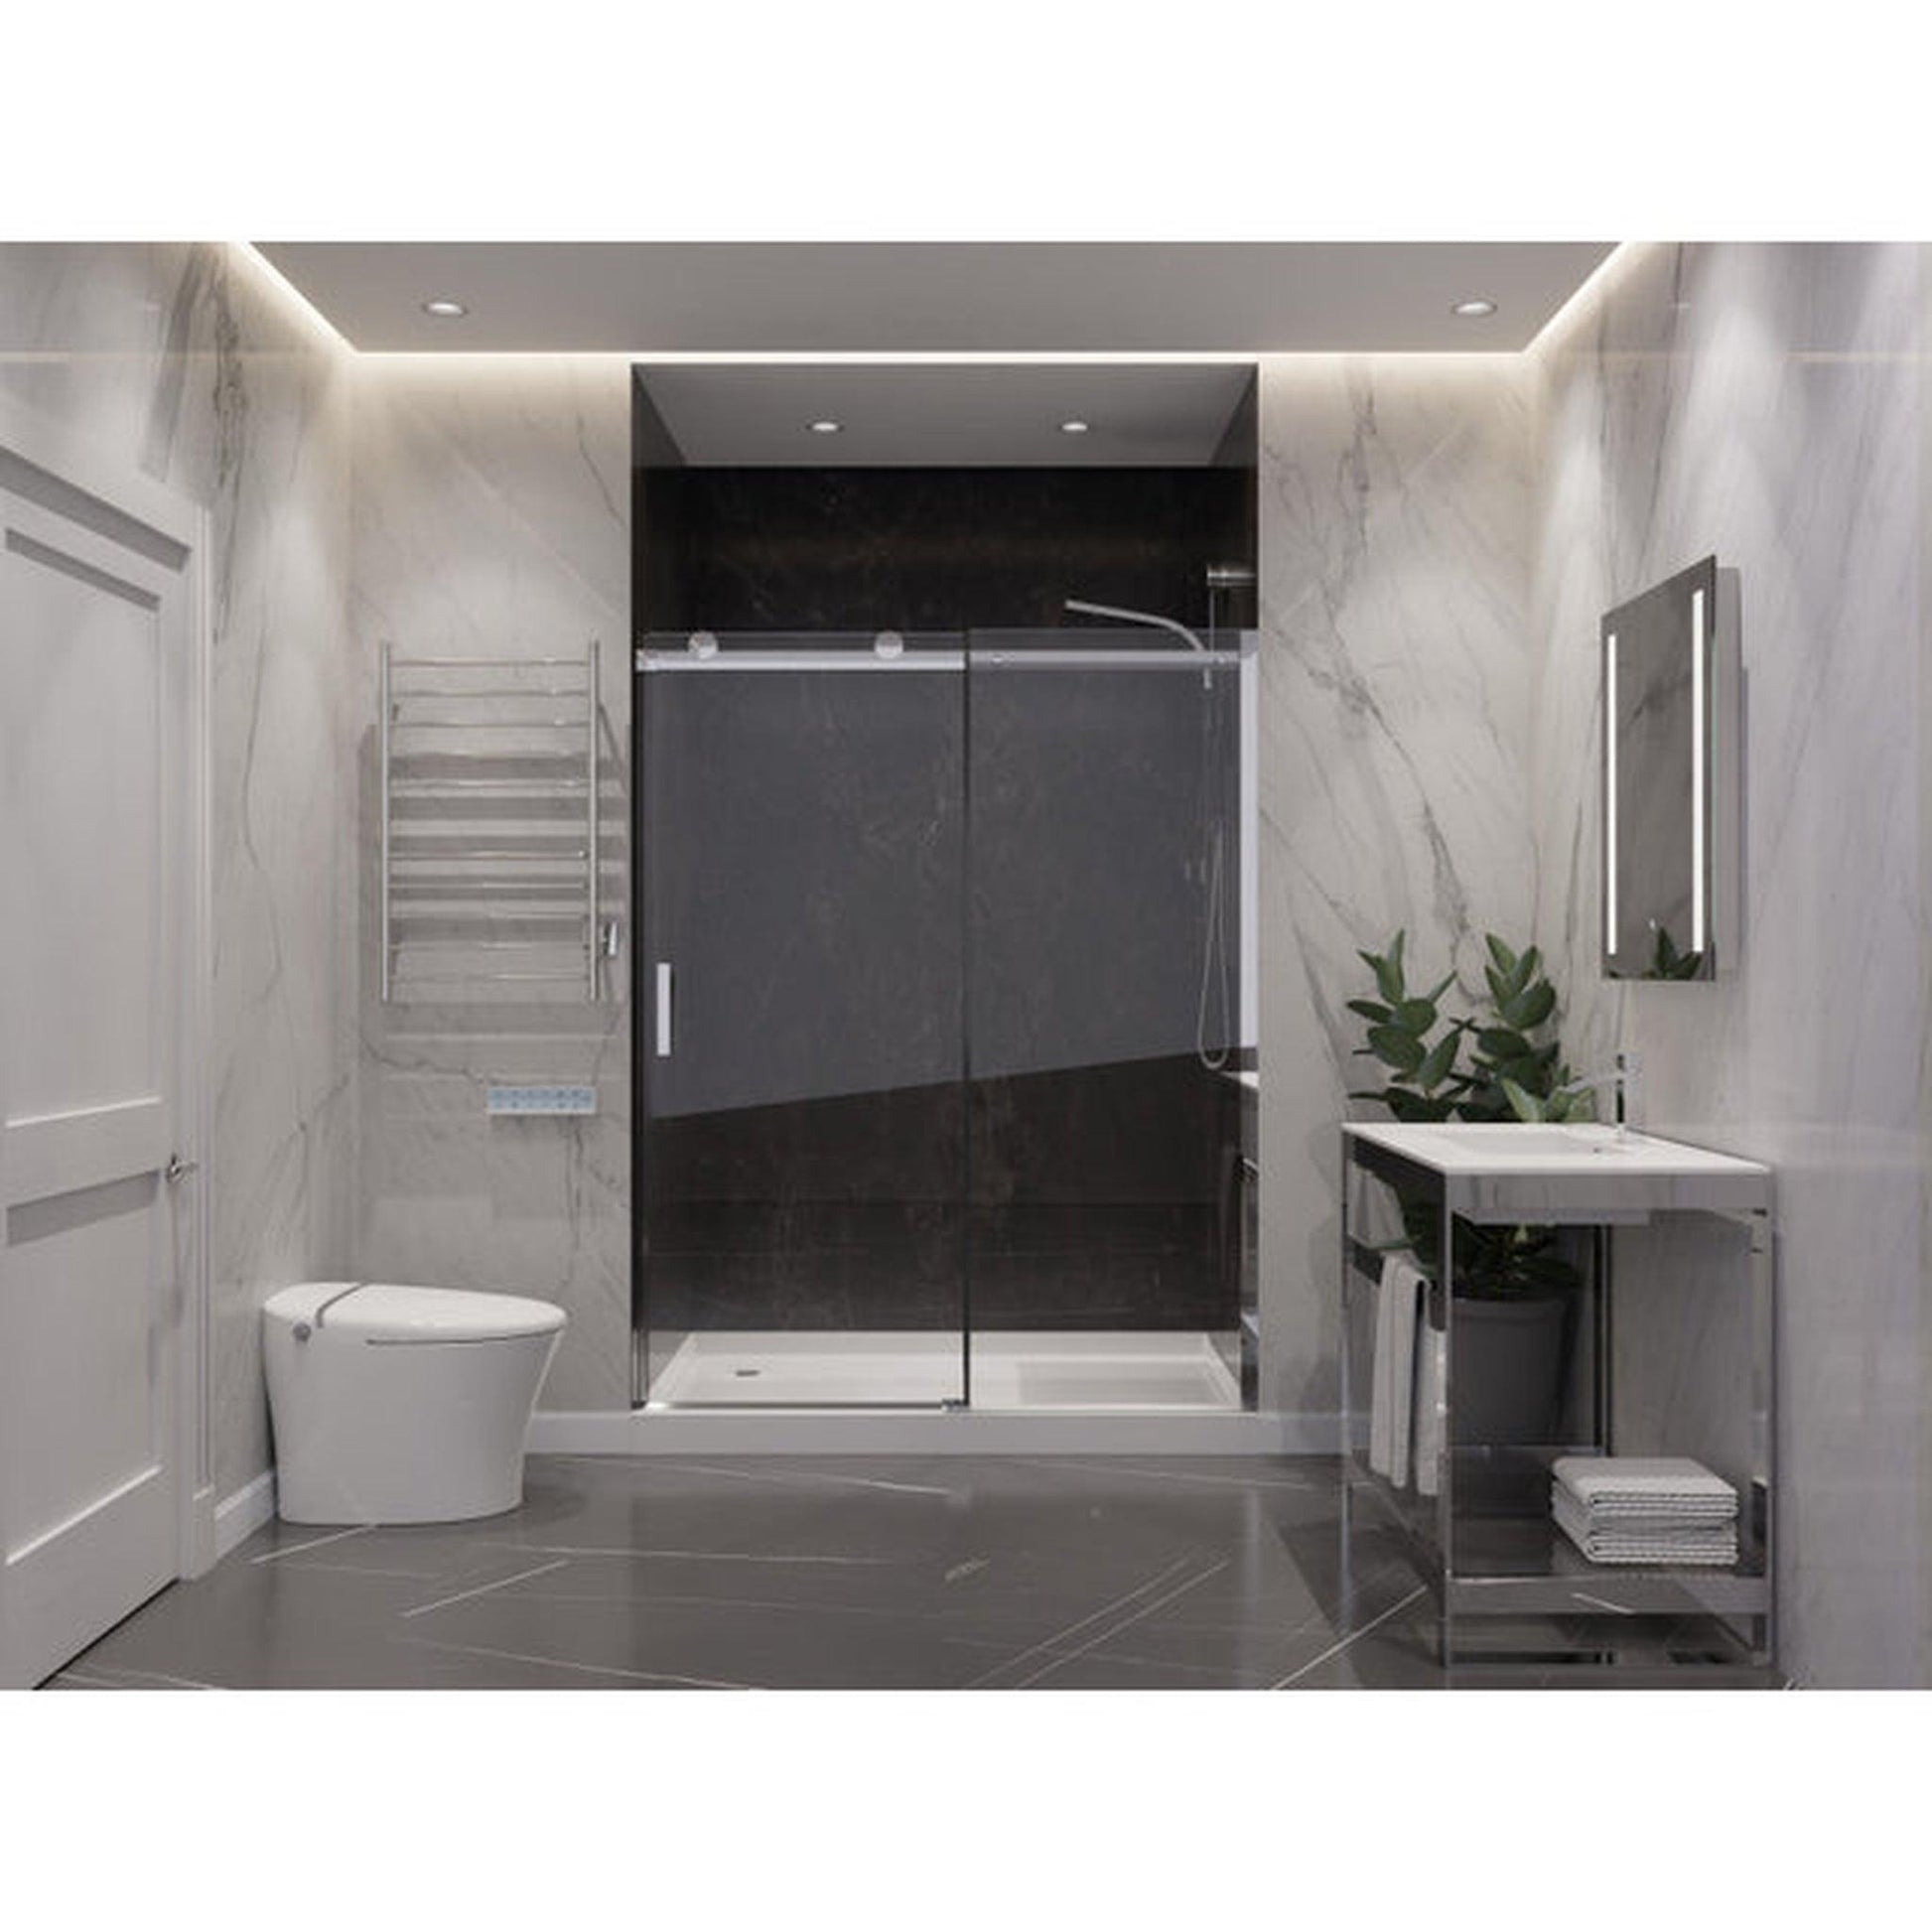 ANZZI Rhodes Series 60" x 76" Frameless Rectangular Polished Chrome Sliding Shower Door With Handle and Tsunami Guard